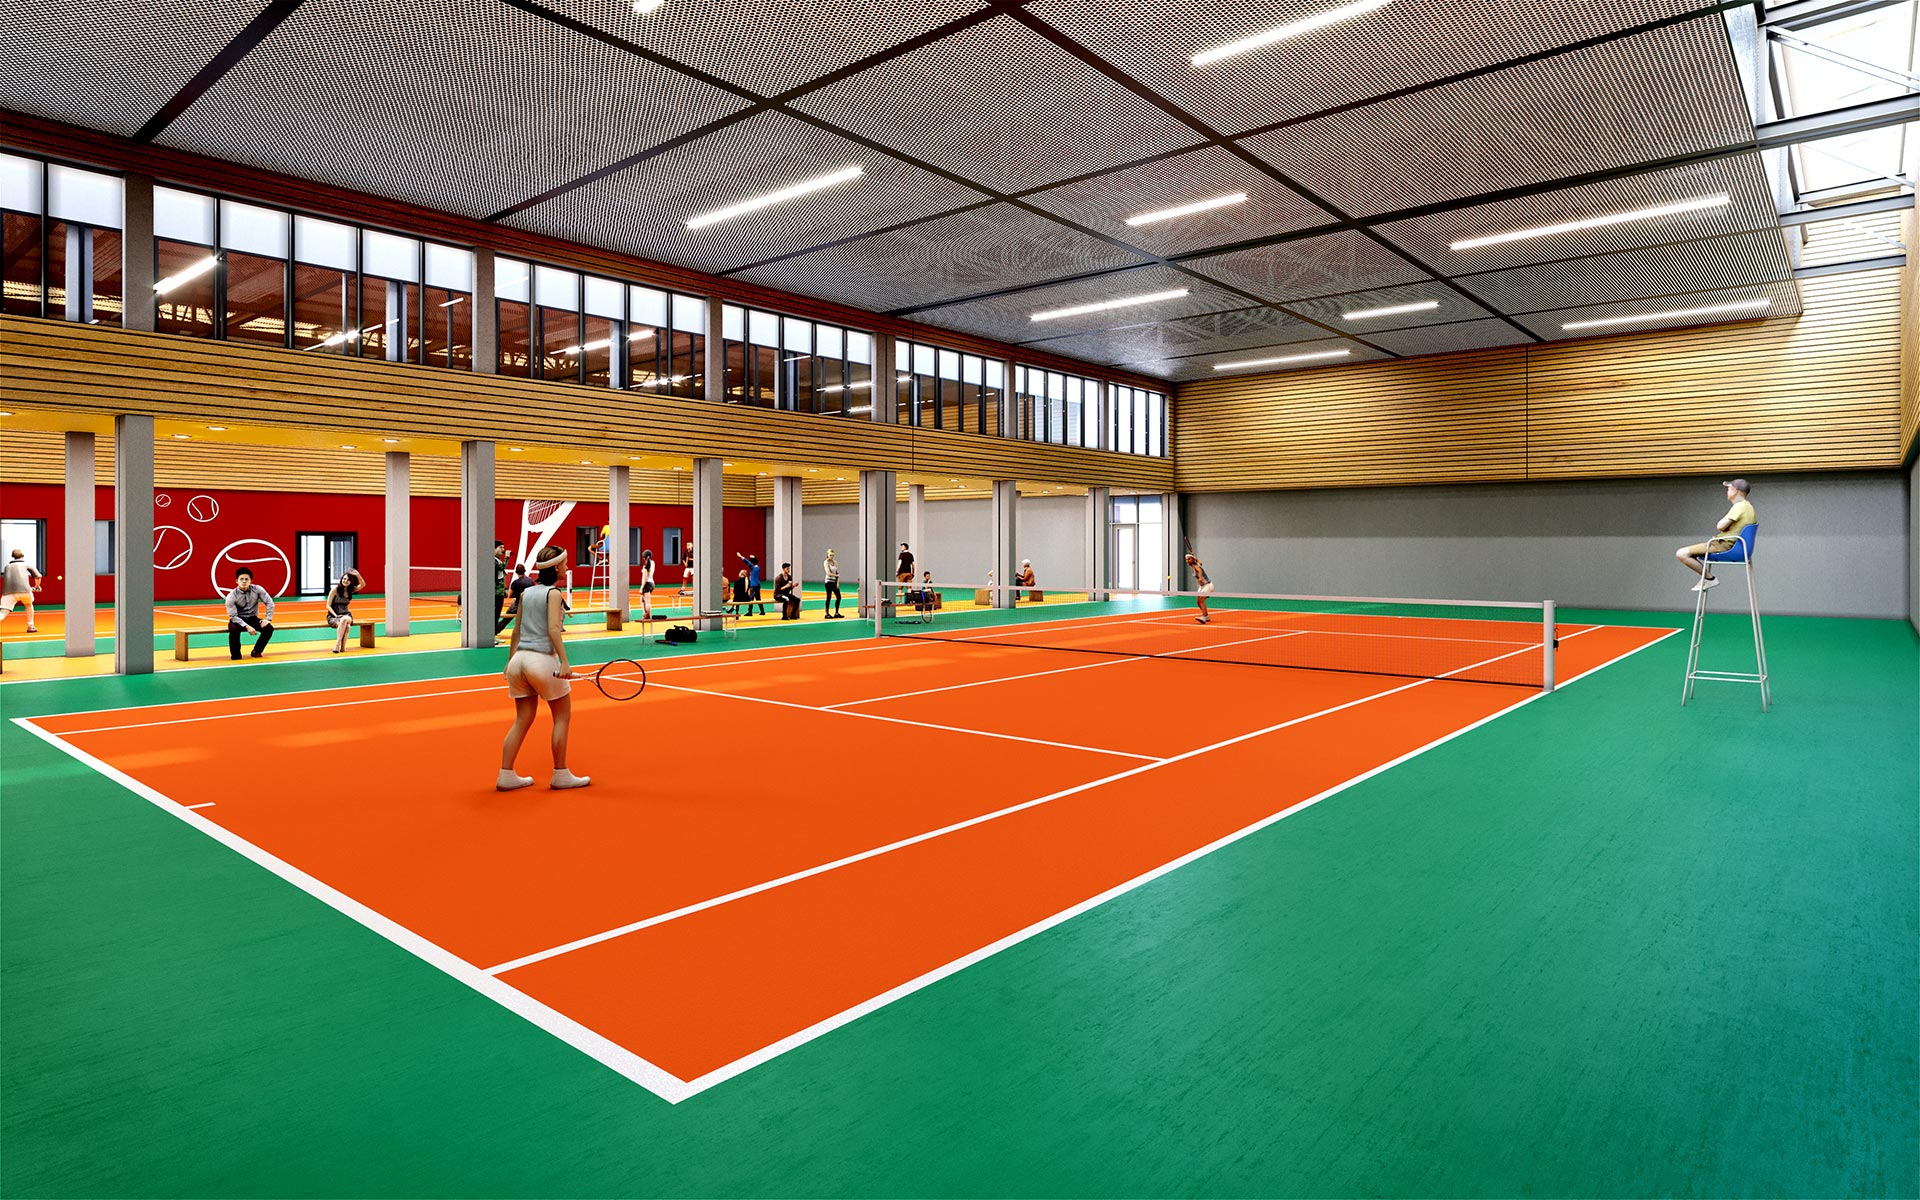 3D interior perspective of a tennis court - Architecture Contest